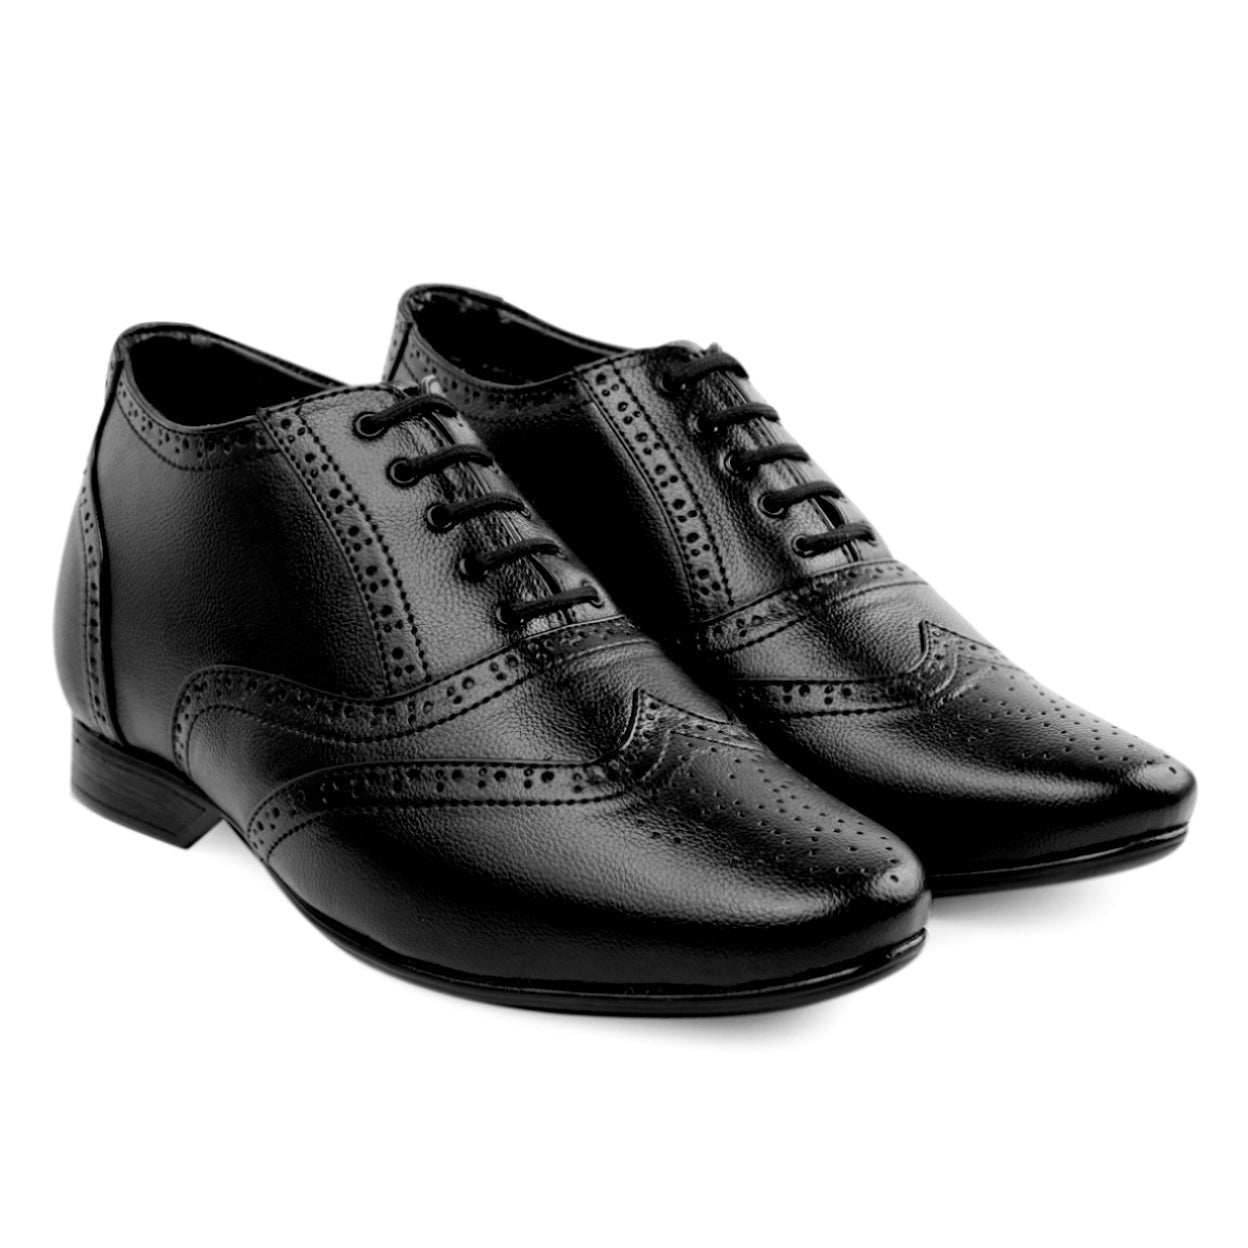 3 Inch Height Increasing Formal Faux Leather Brogue Oxford Shoes